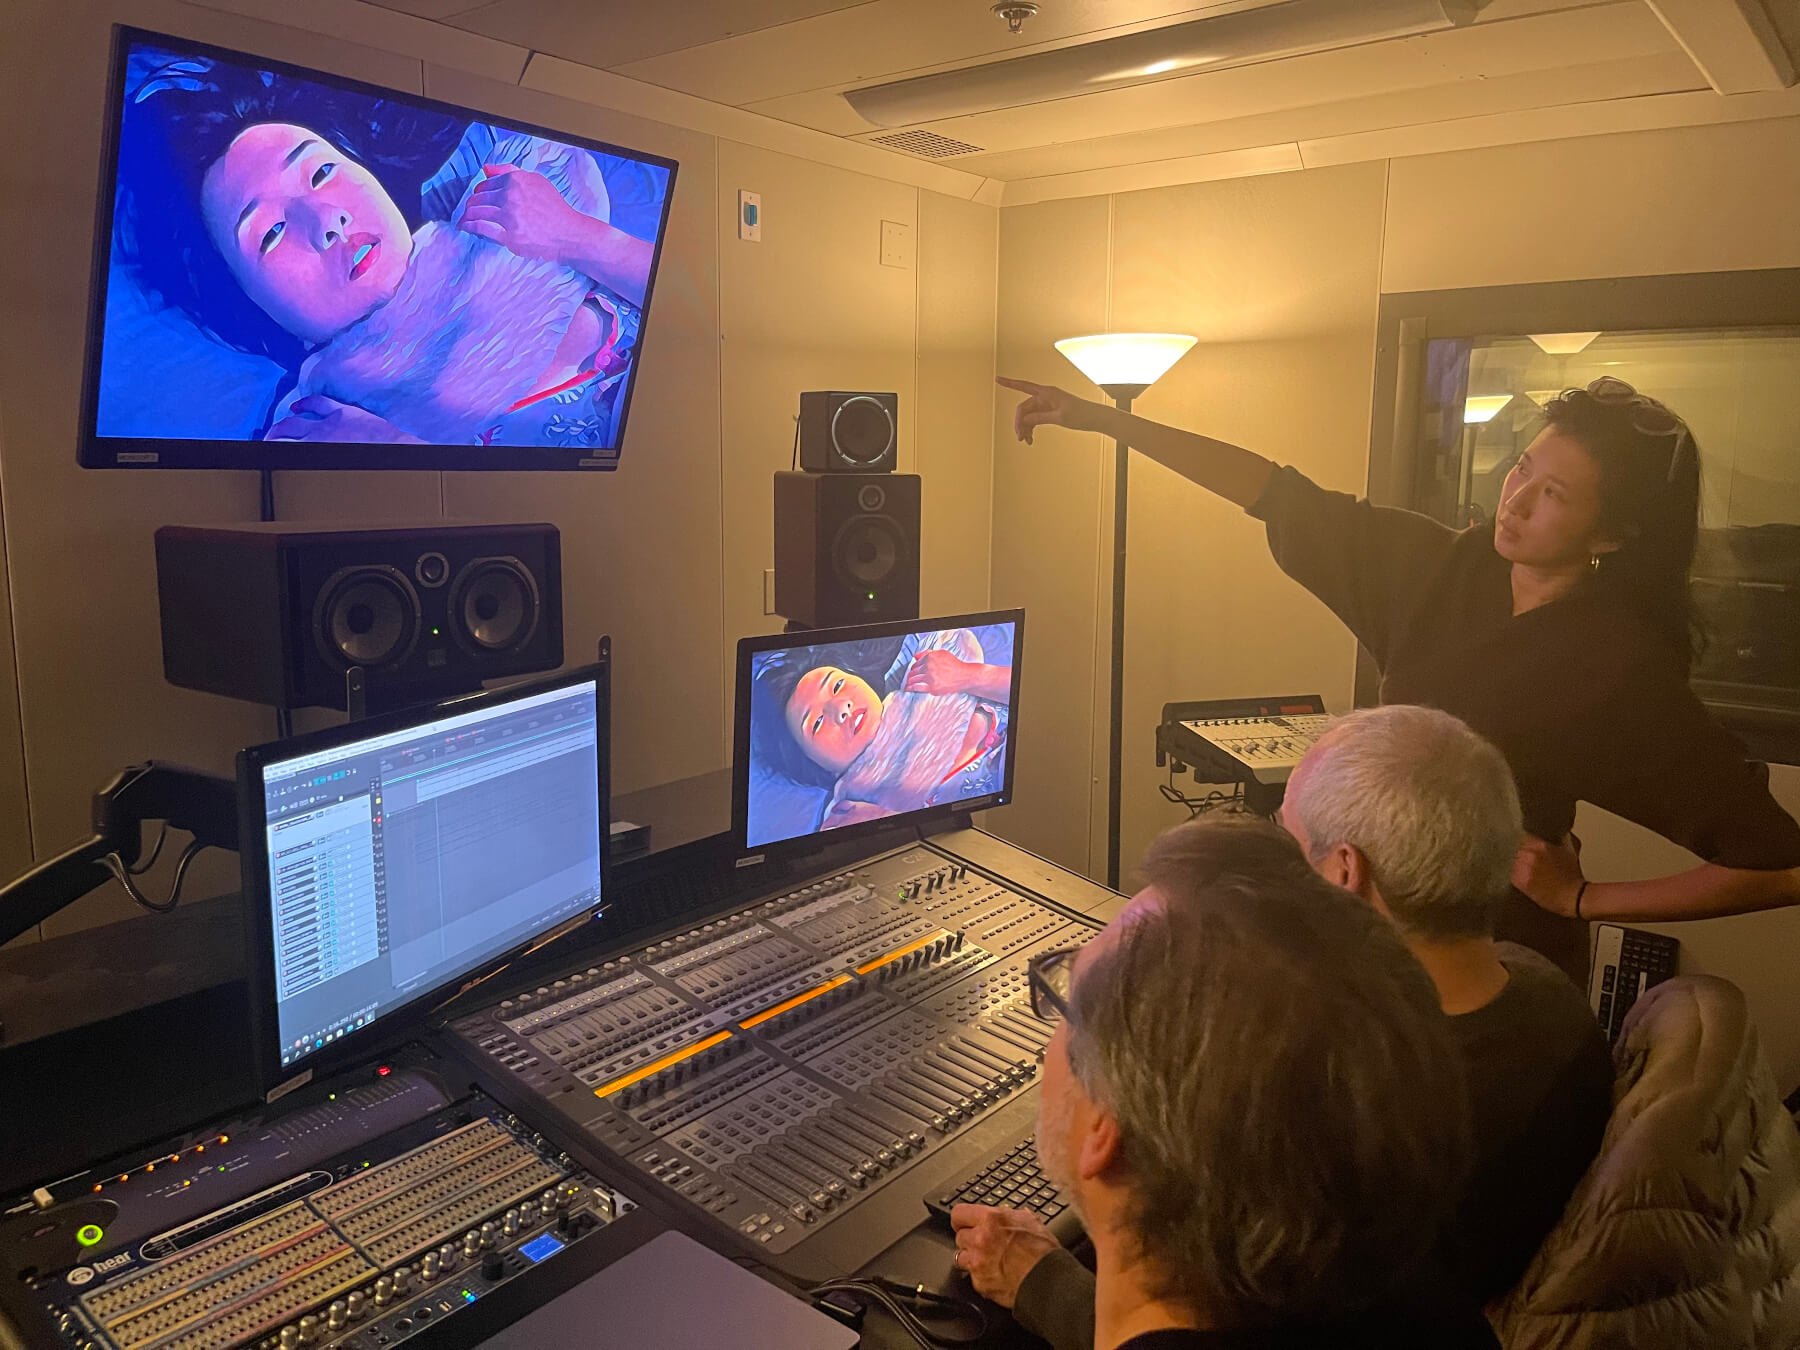 Chris Mosio and Lawrence Schwedler sit at studio sound board while Clare Chun stands and points at television monitor.